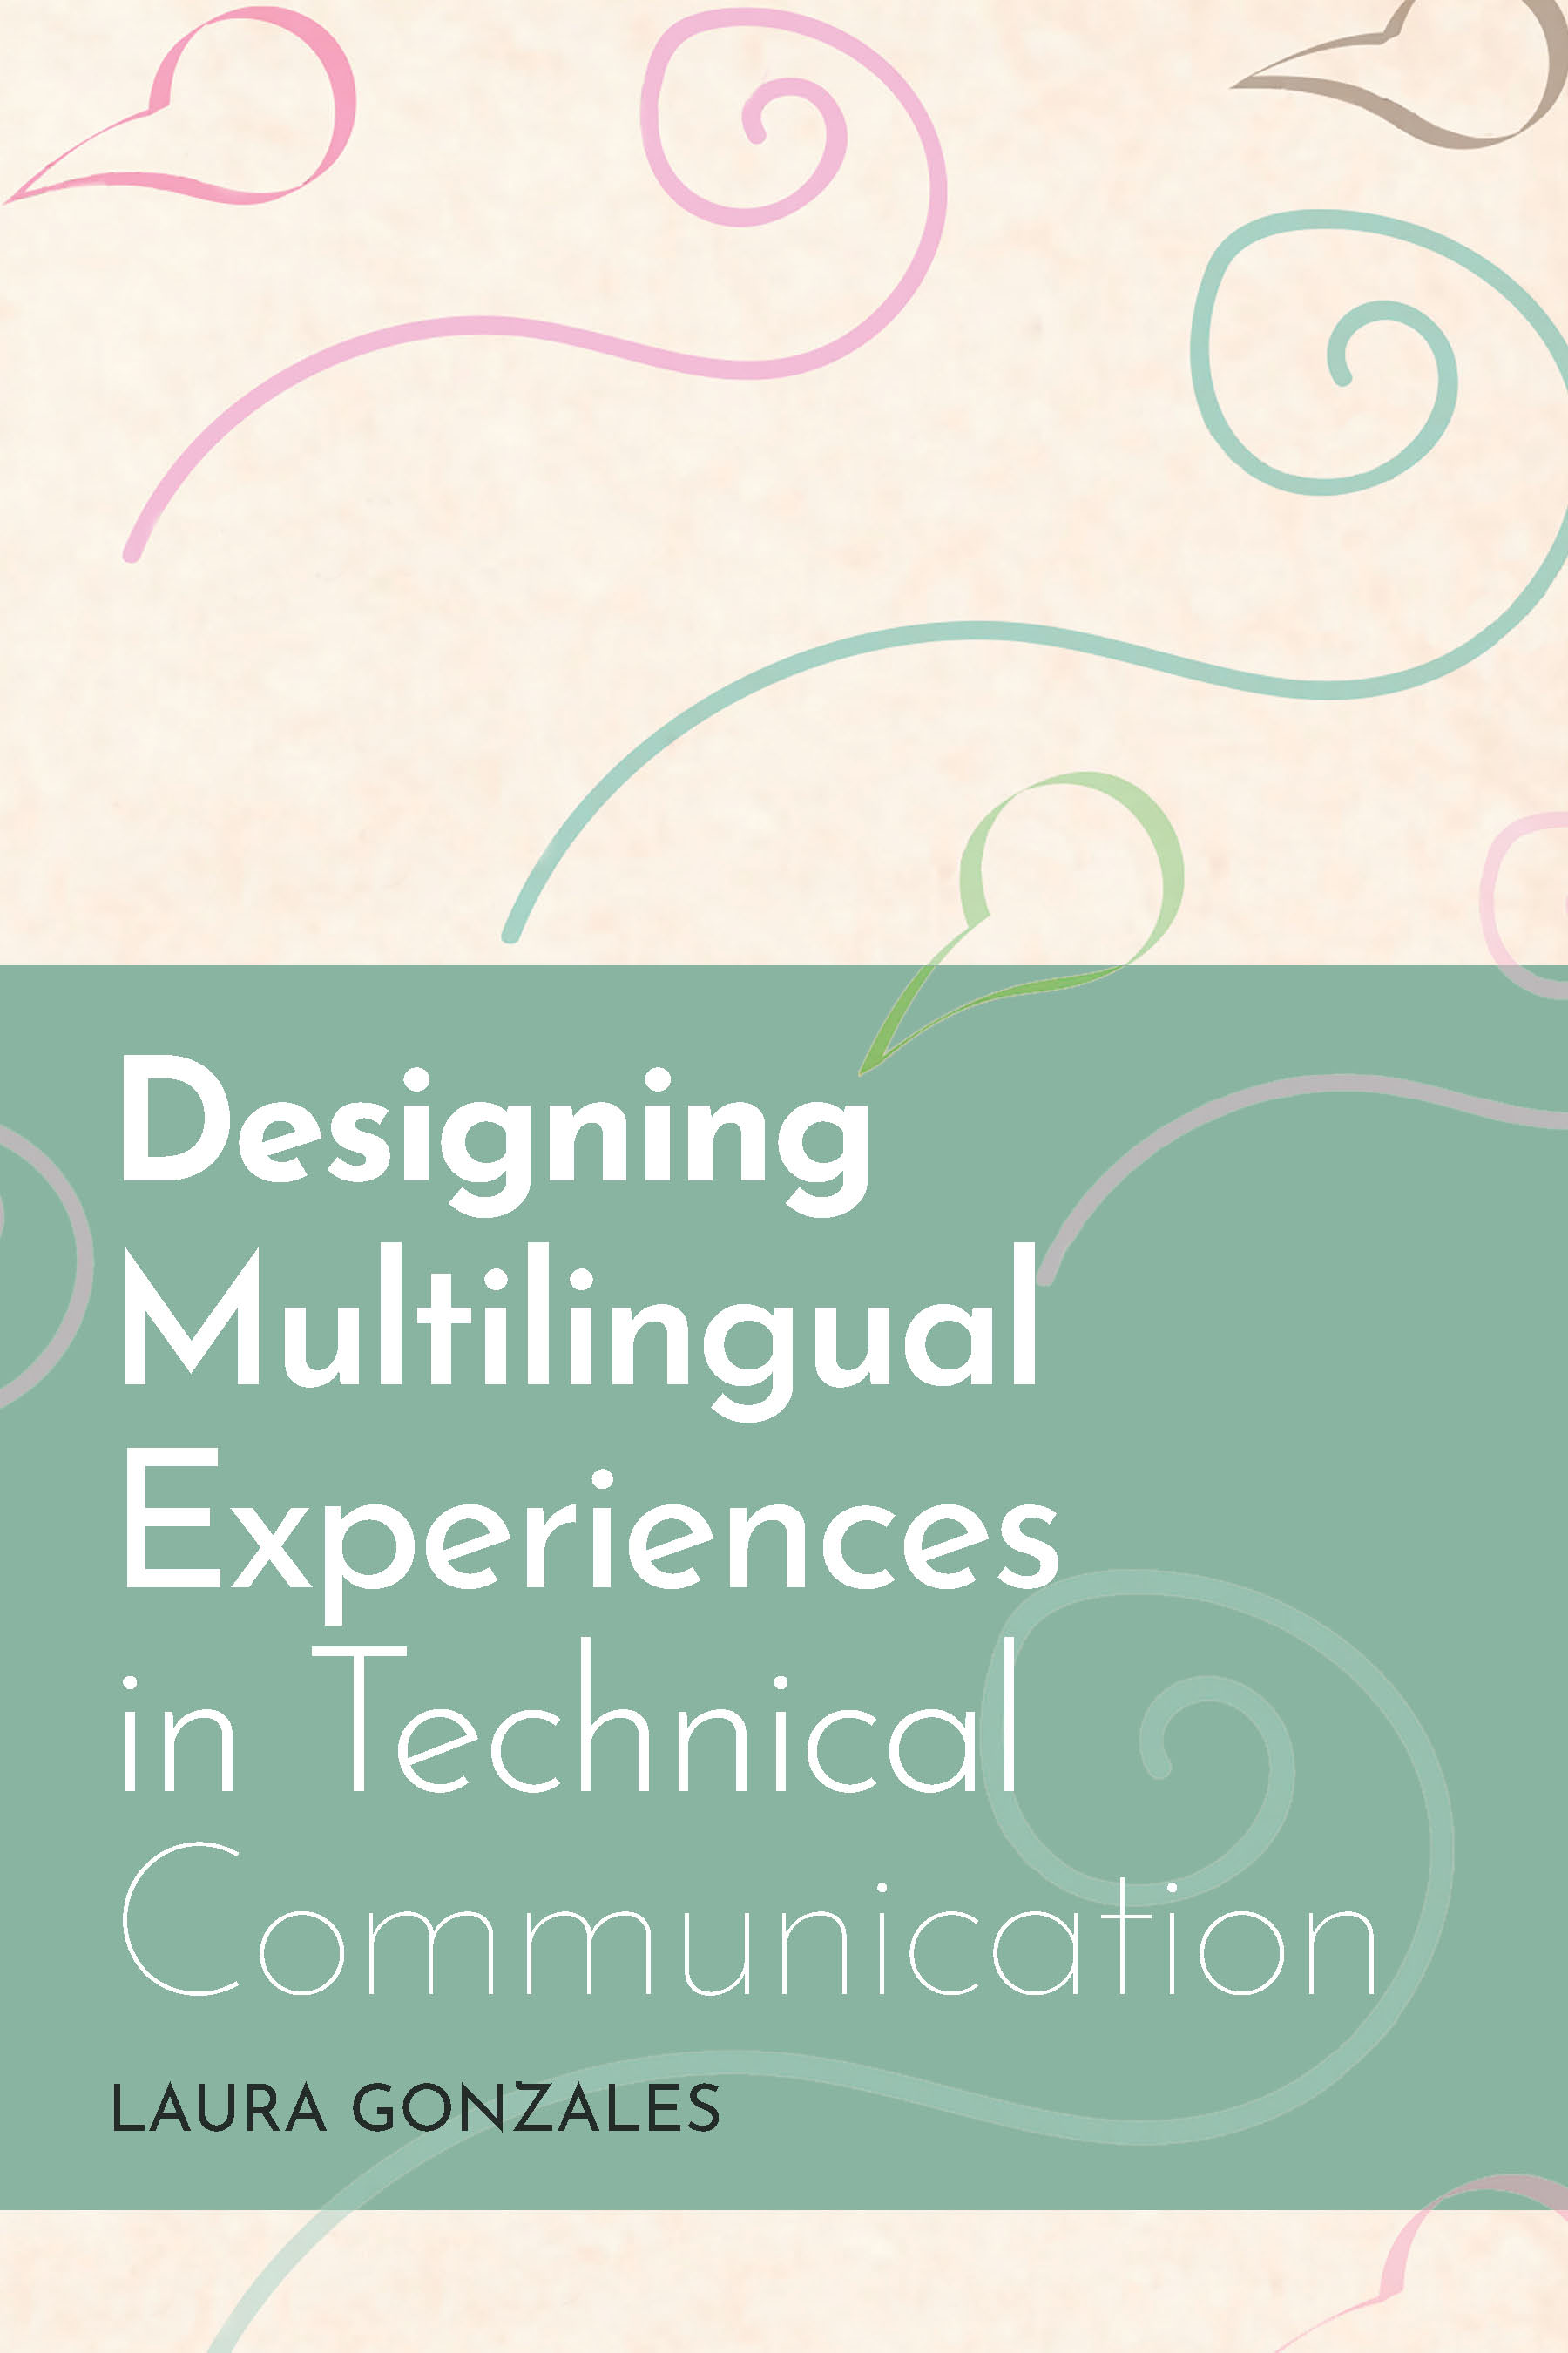 Designing Multilingual Experiences in Technical Communication